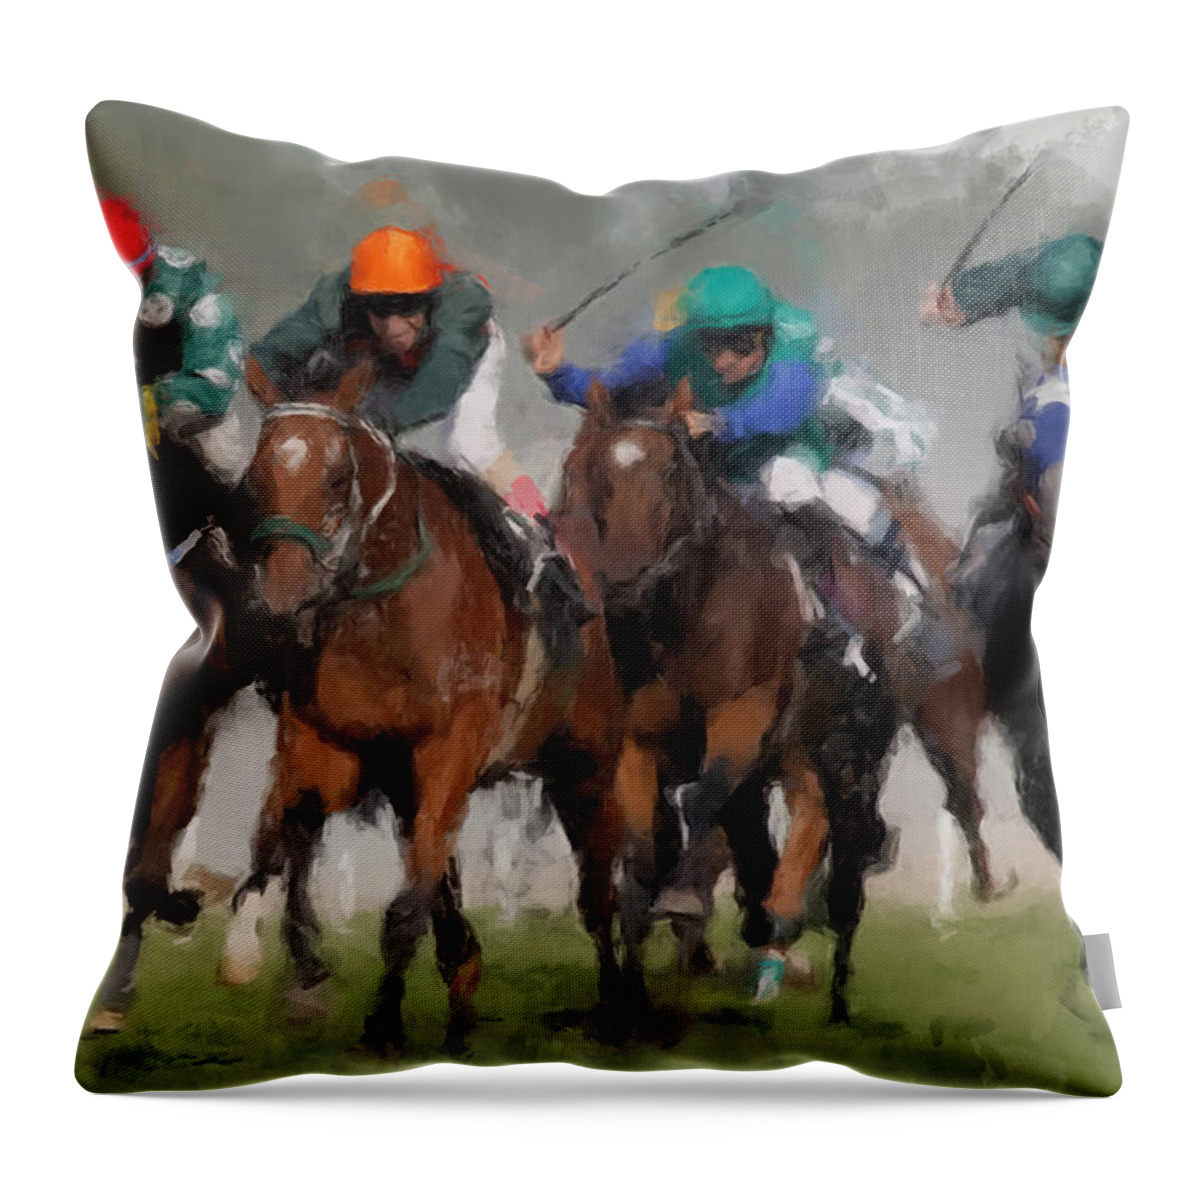 Horses Throw Pillow featuring the painting Finishline by Gary Arnold